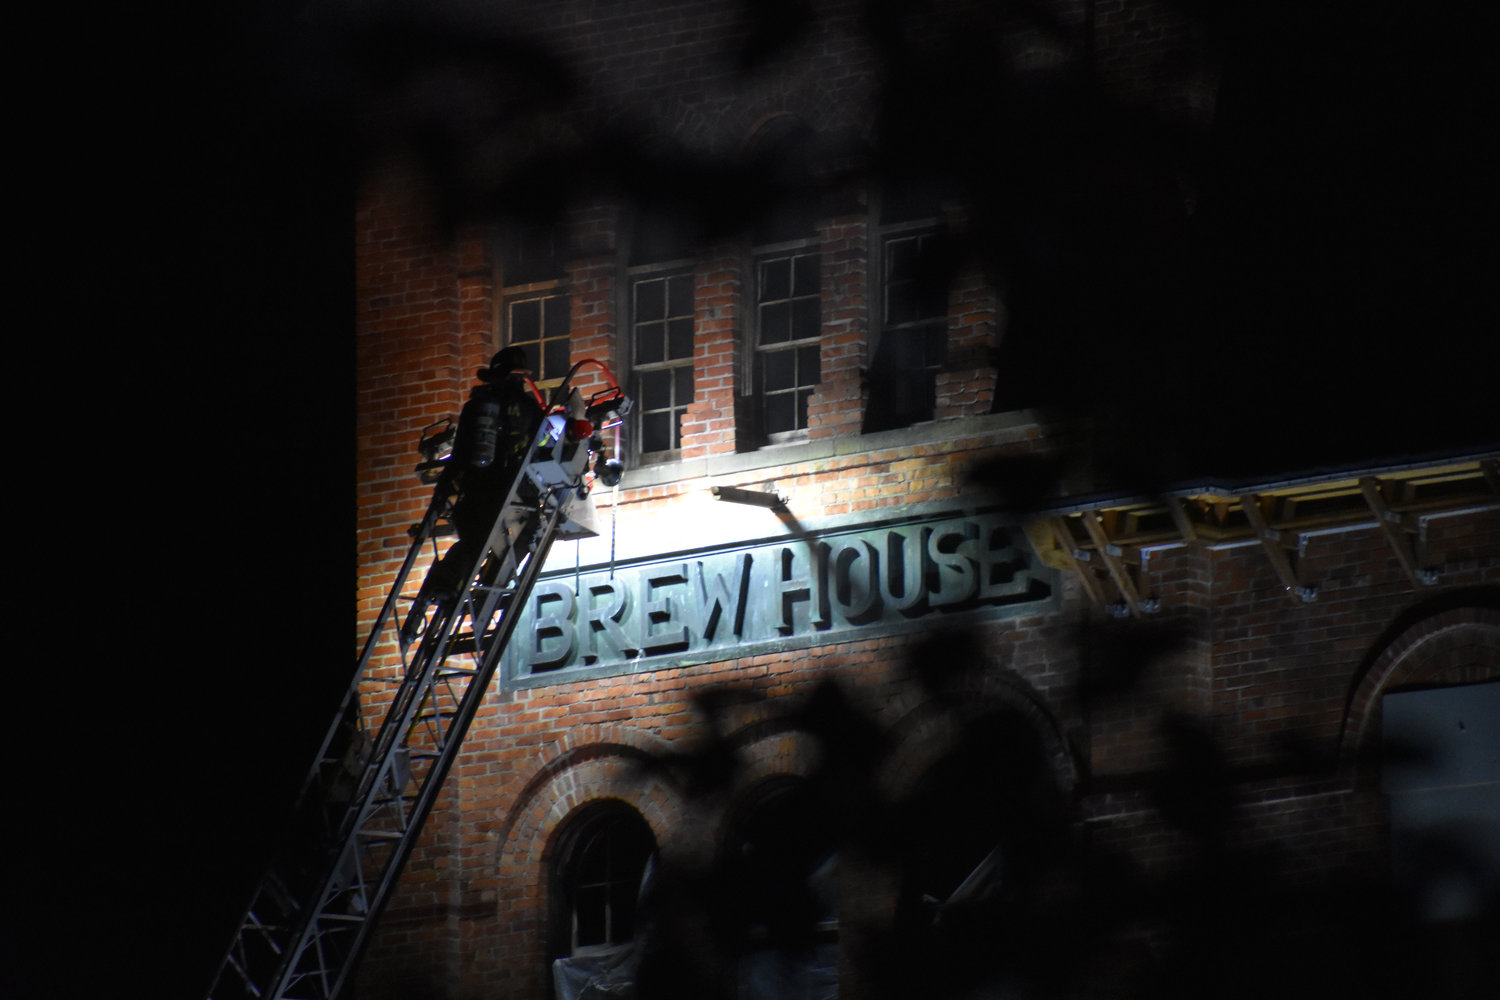 A firefighter puts out a fire at the Old Brewery Tower in Tumwater on June 6. The Tumwater Police Department determined the cause of the fire to be arson.